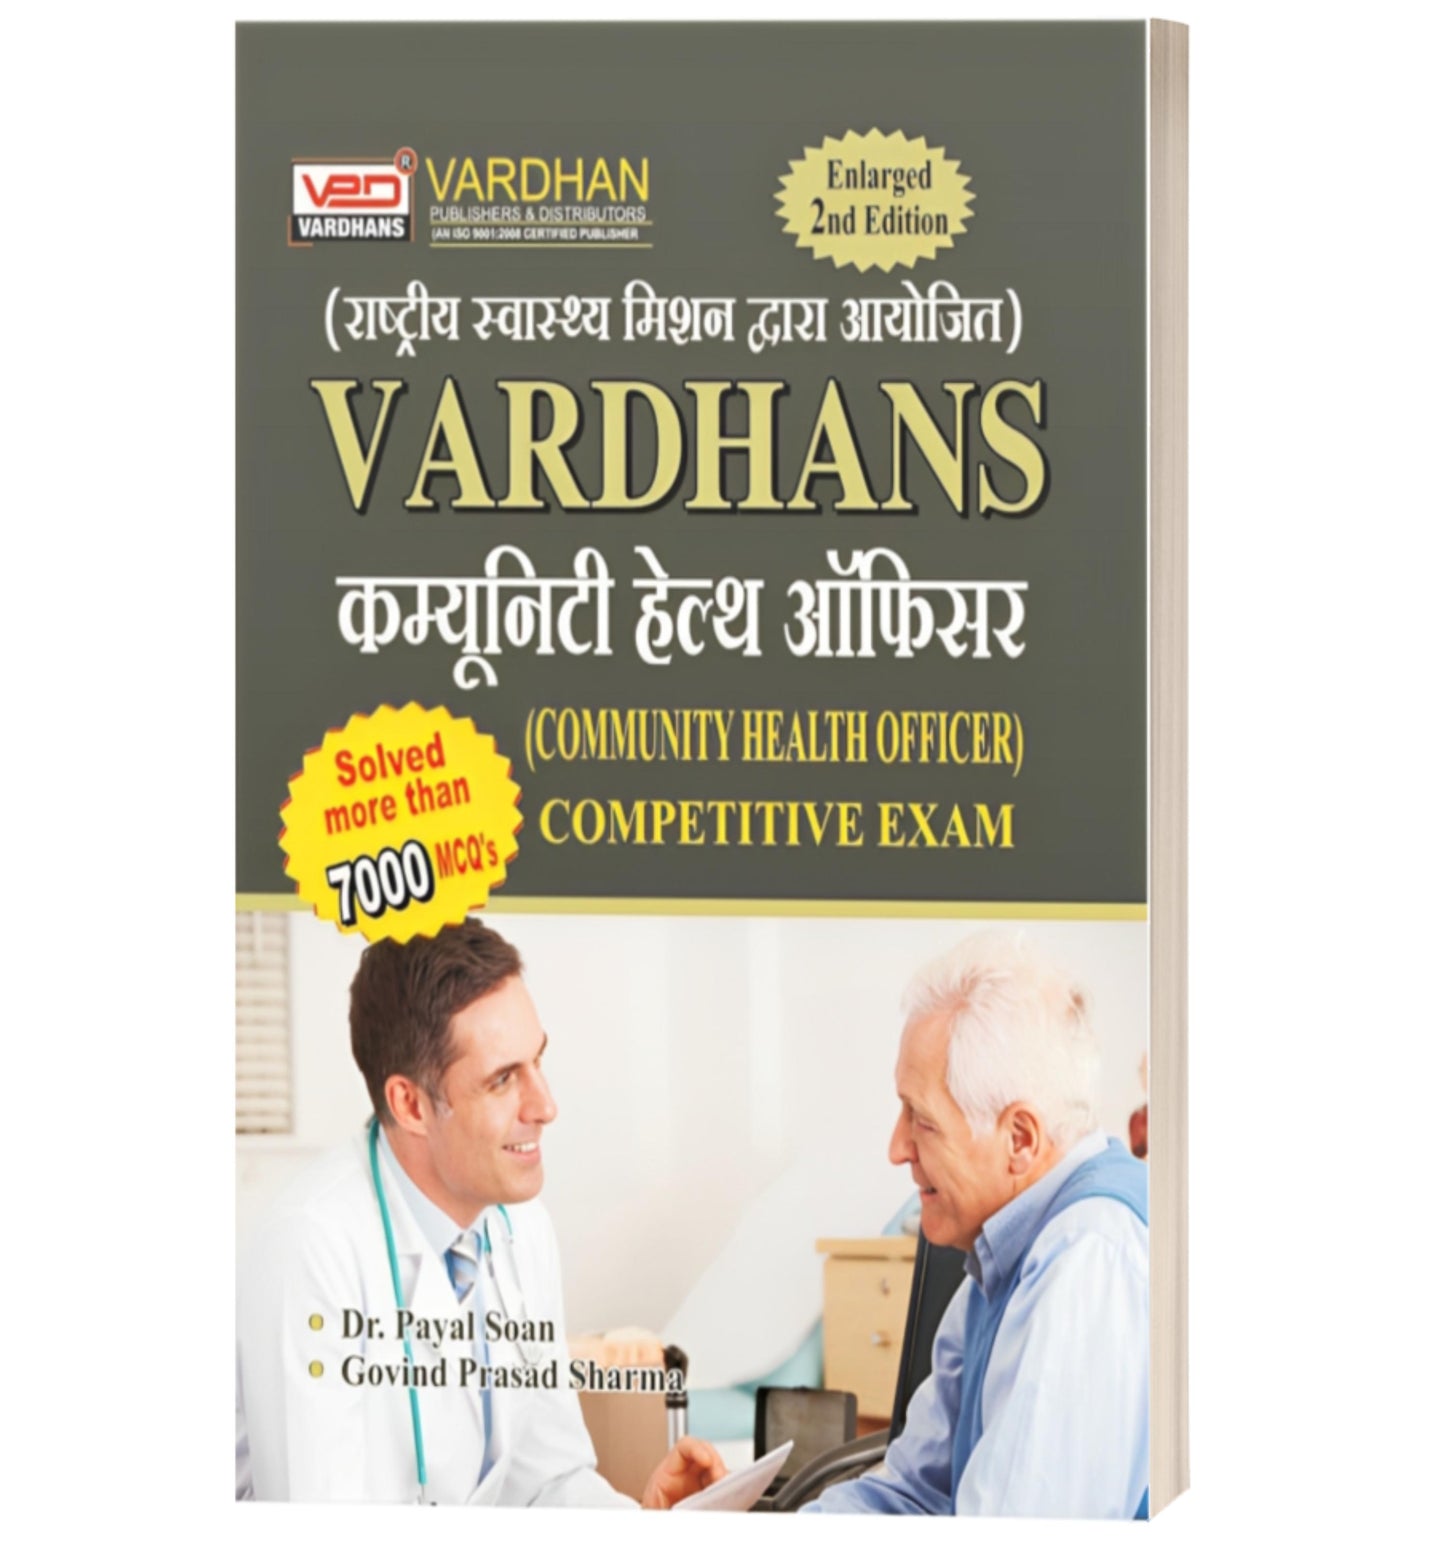 Vardhan -Community Health Officer for Competition Exam. (H)